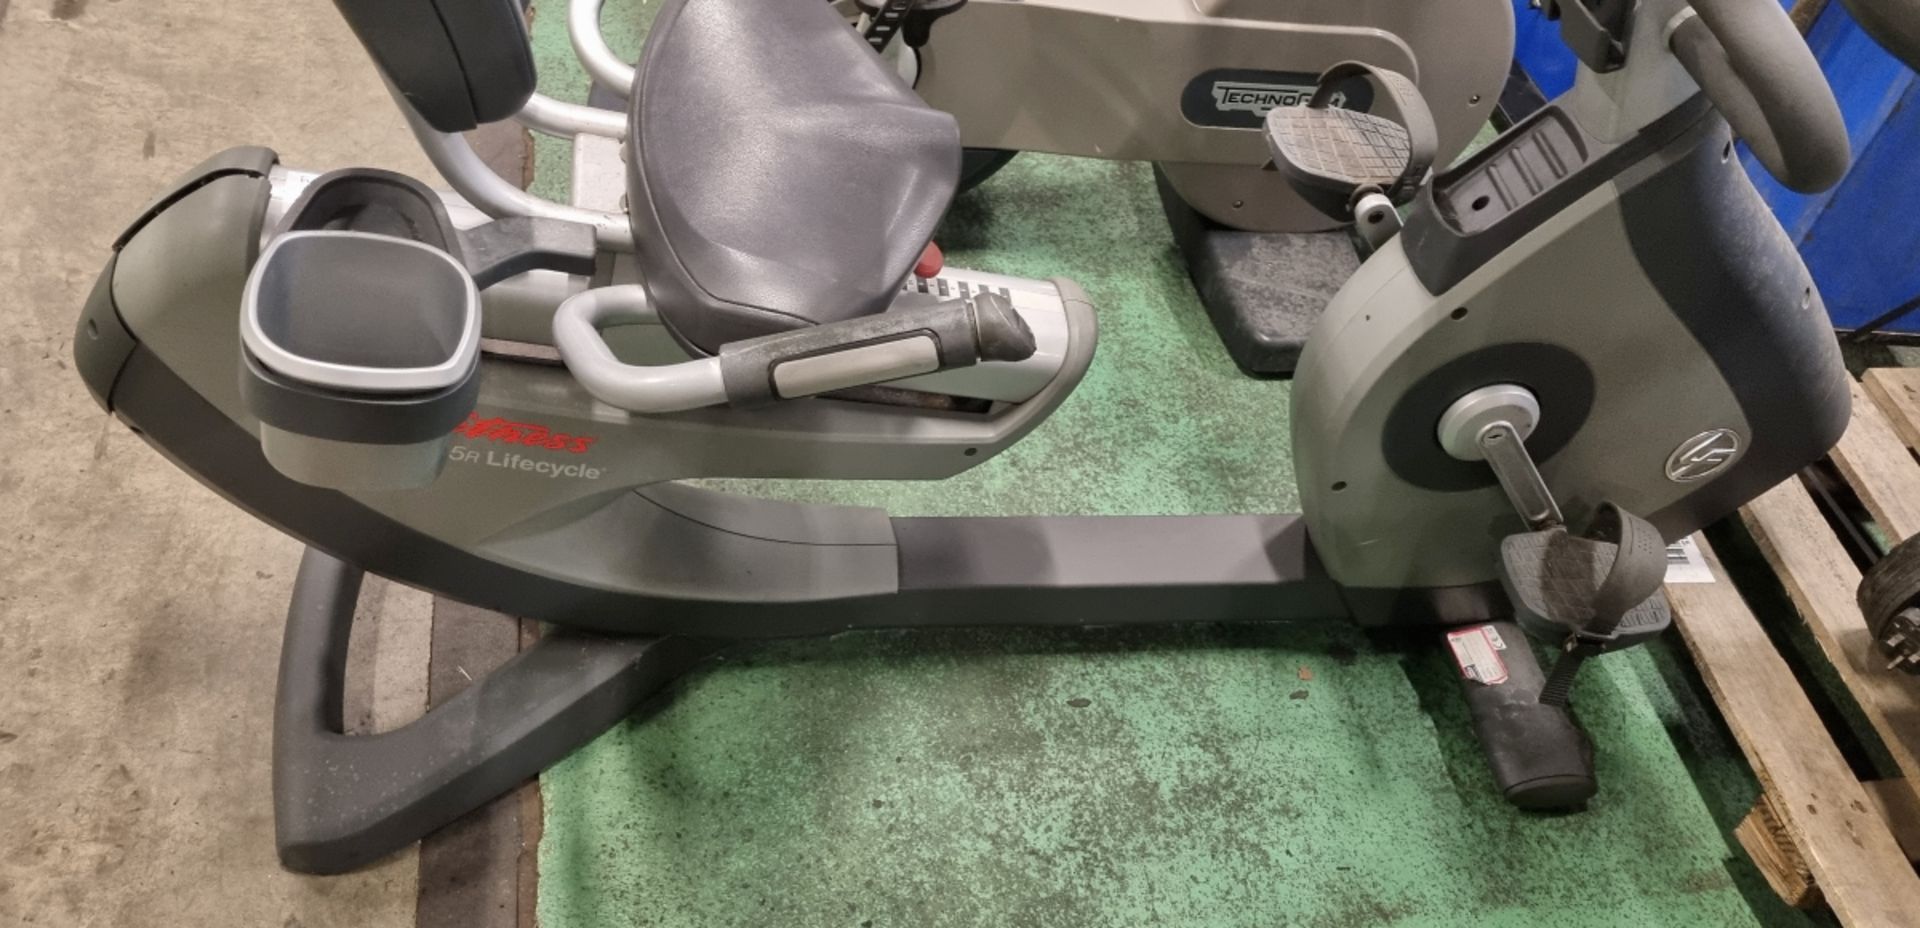 Life Fitness 95R Lifecycle recumbent exercise bike - L 1650 x W 690 x H 1350mm - Image 3 of 6